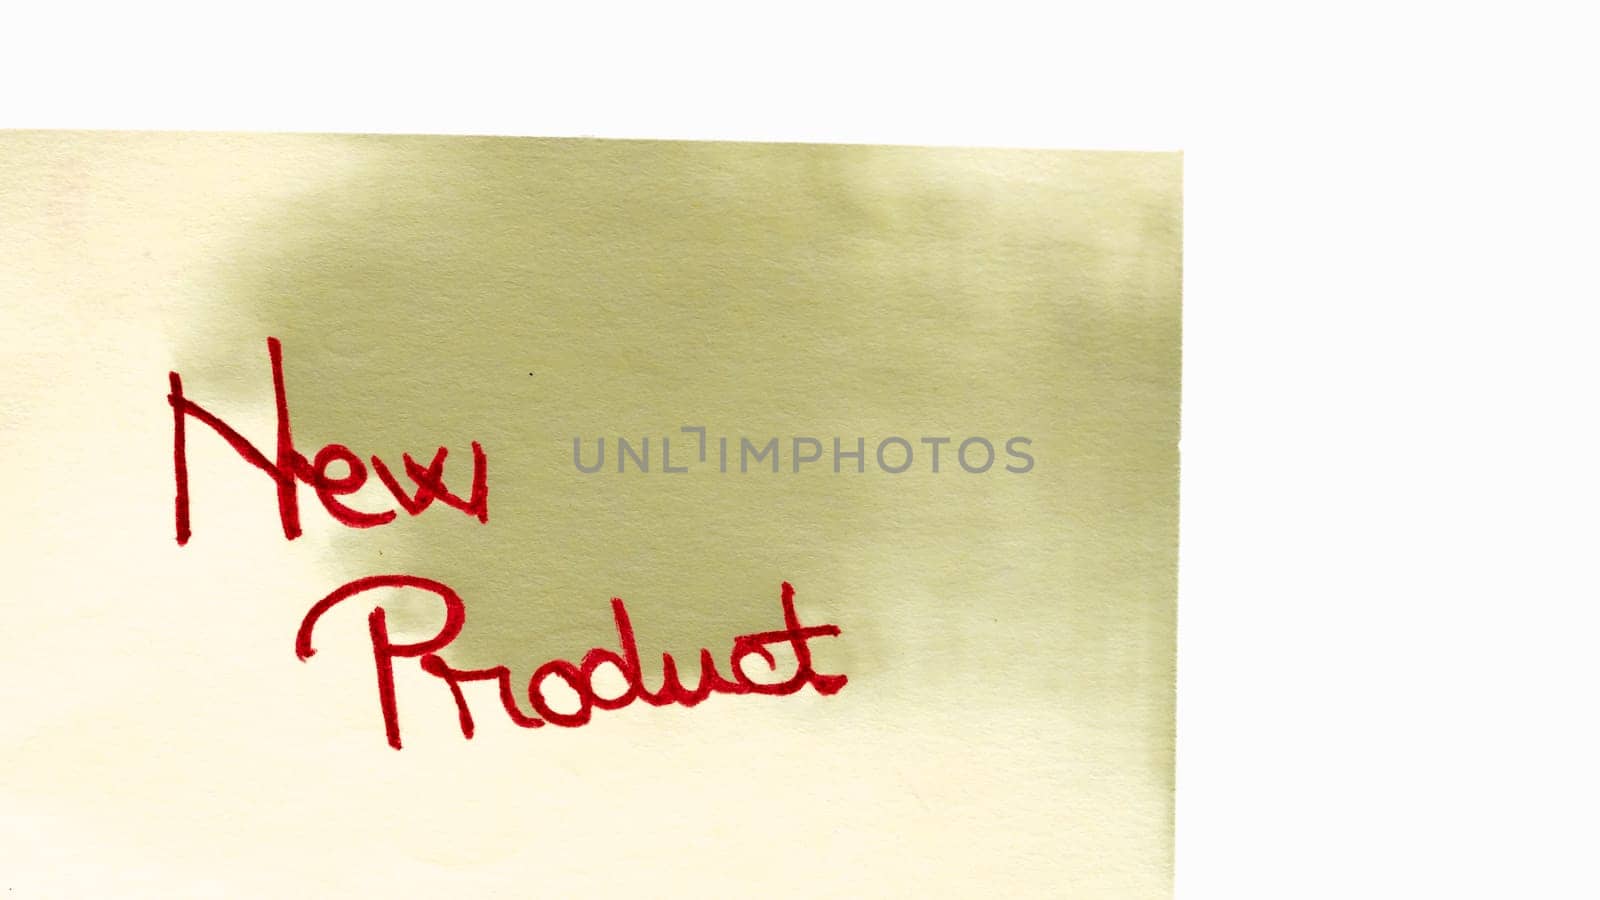 New product handwriting text close up isolated on yellow paper with copy space. by vladispas